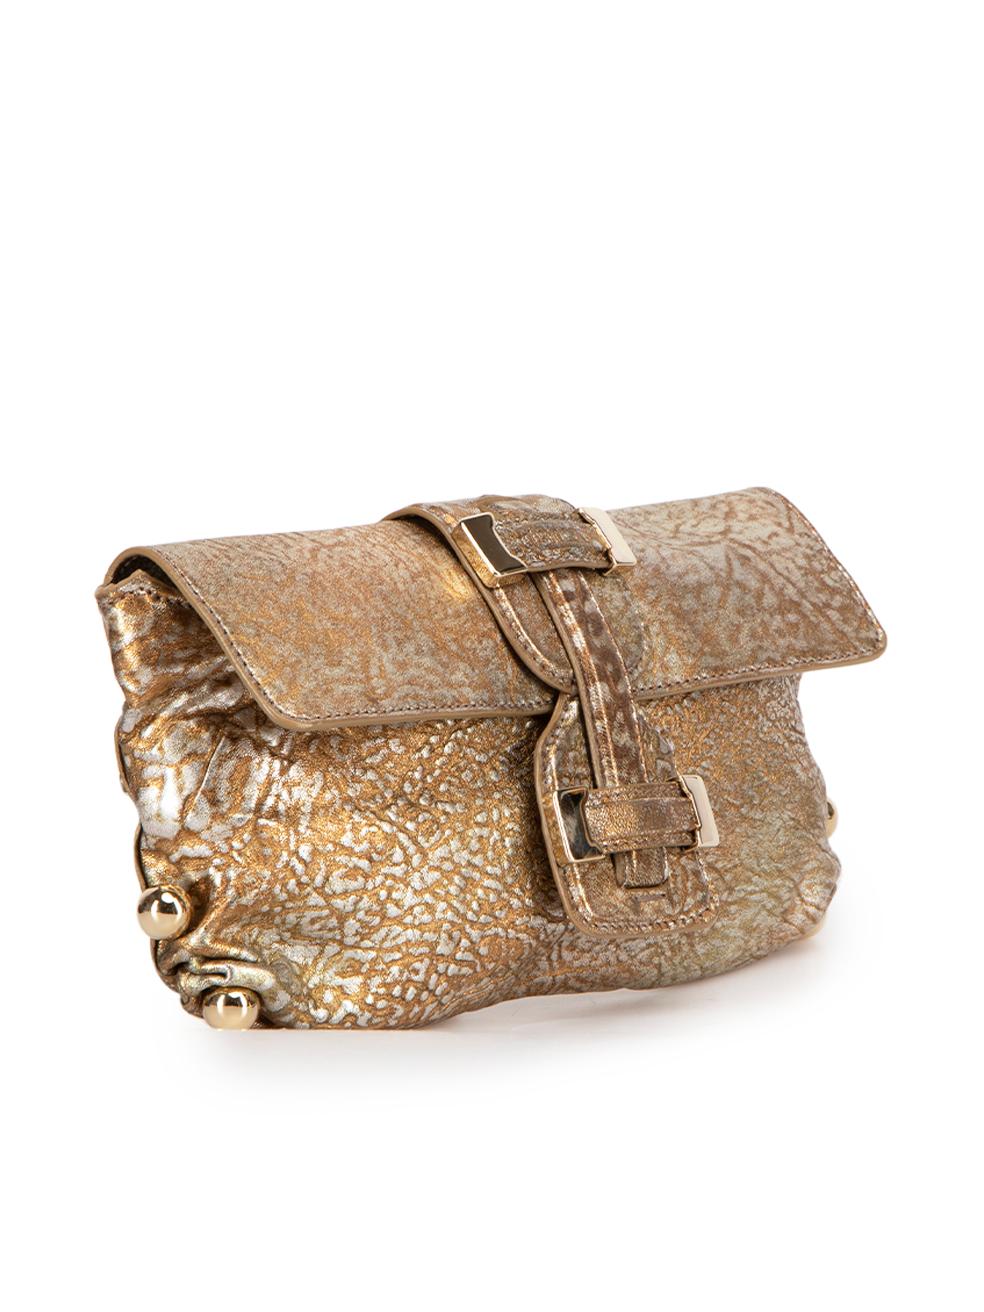 CONDITION is Very good. Minimal wear to clutch is evident. Minimal wear to overall leather on this used Roberto Cavalli designer resale item. Original dust bag is included.



Details


Gold metallic

Leather

Clutch bag

Silver patterned

Gold tone